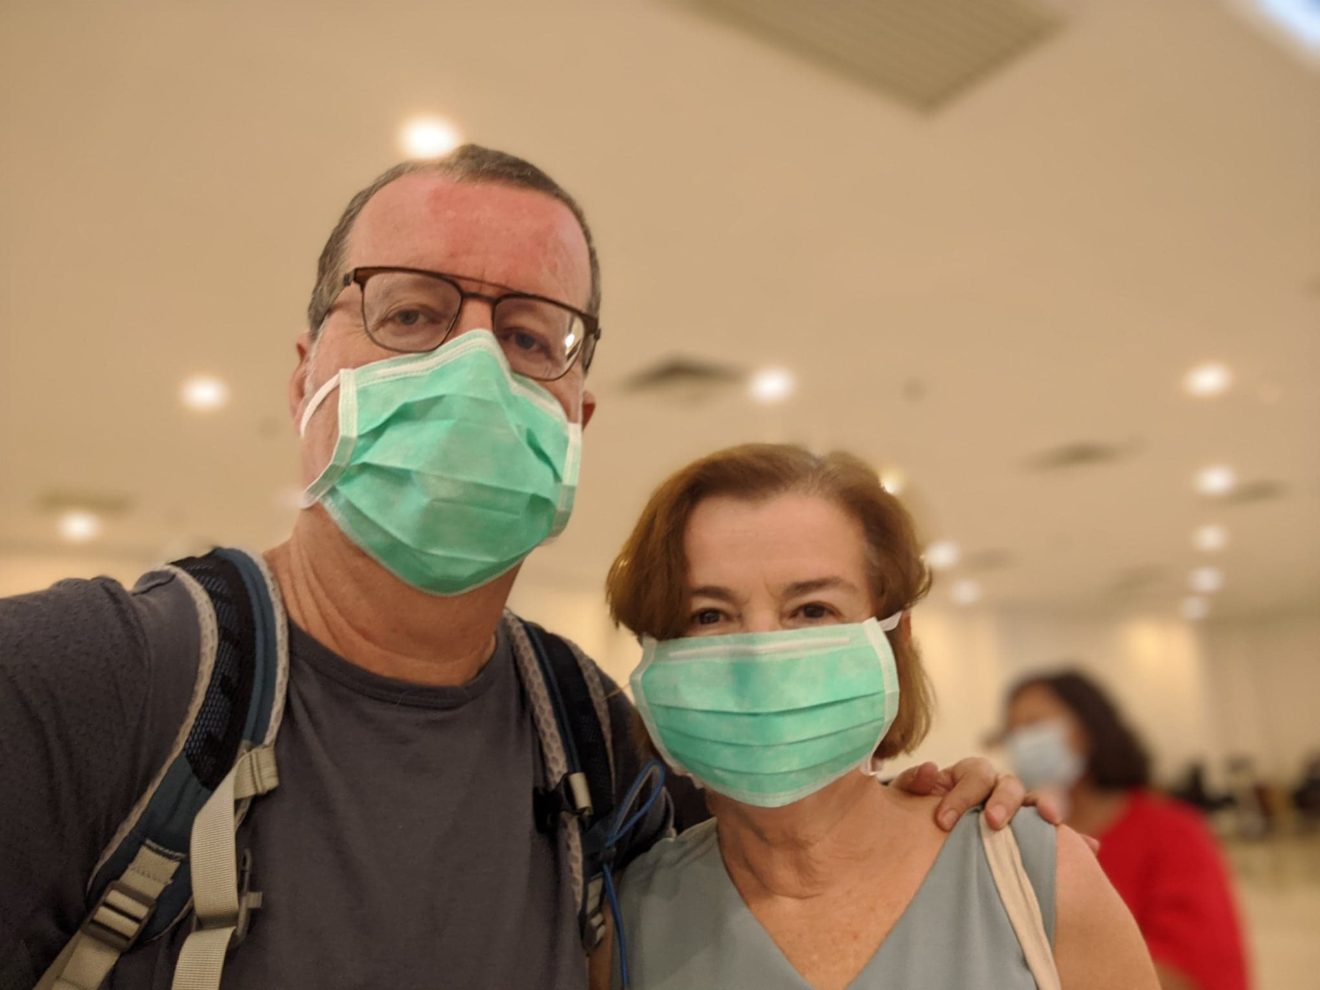 How Coronavirus Has Changed Our Travel Plans